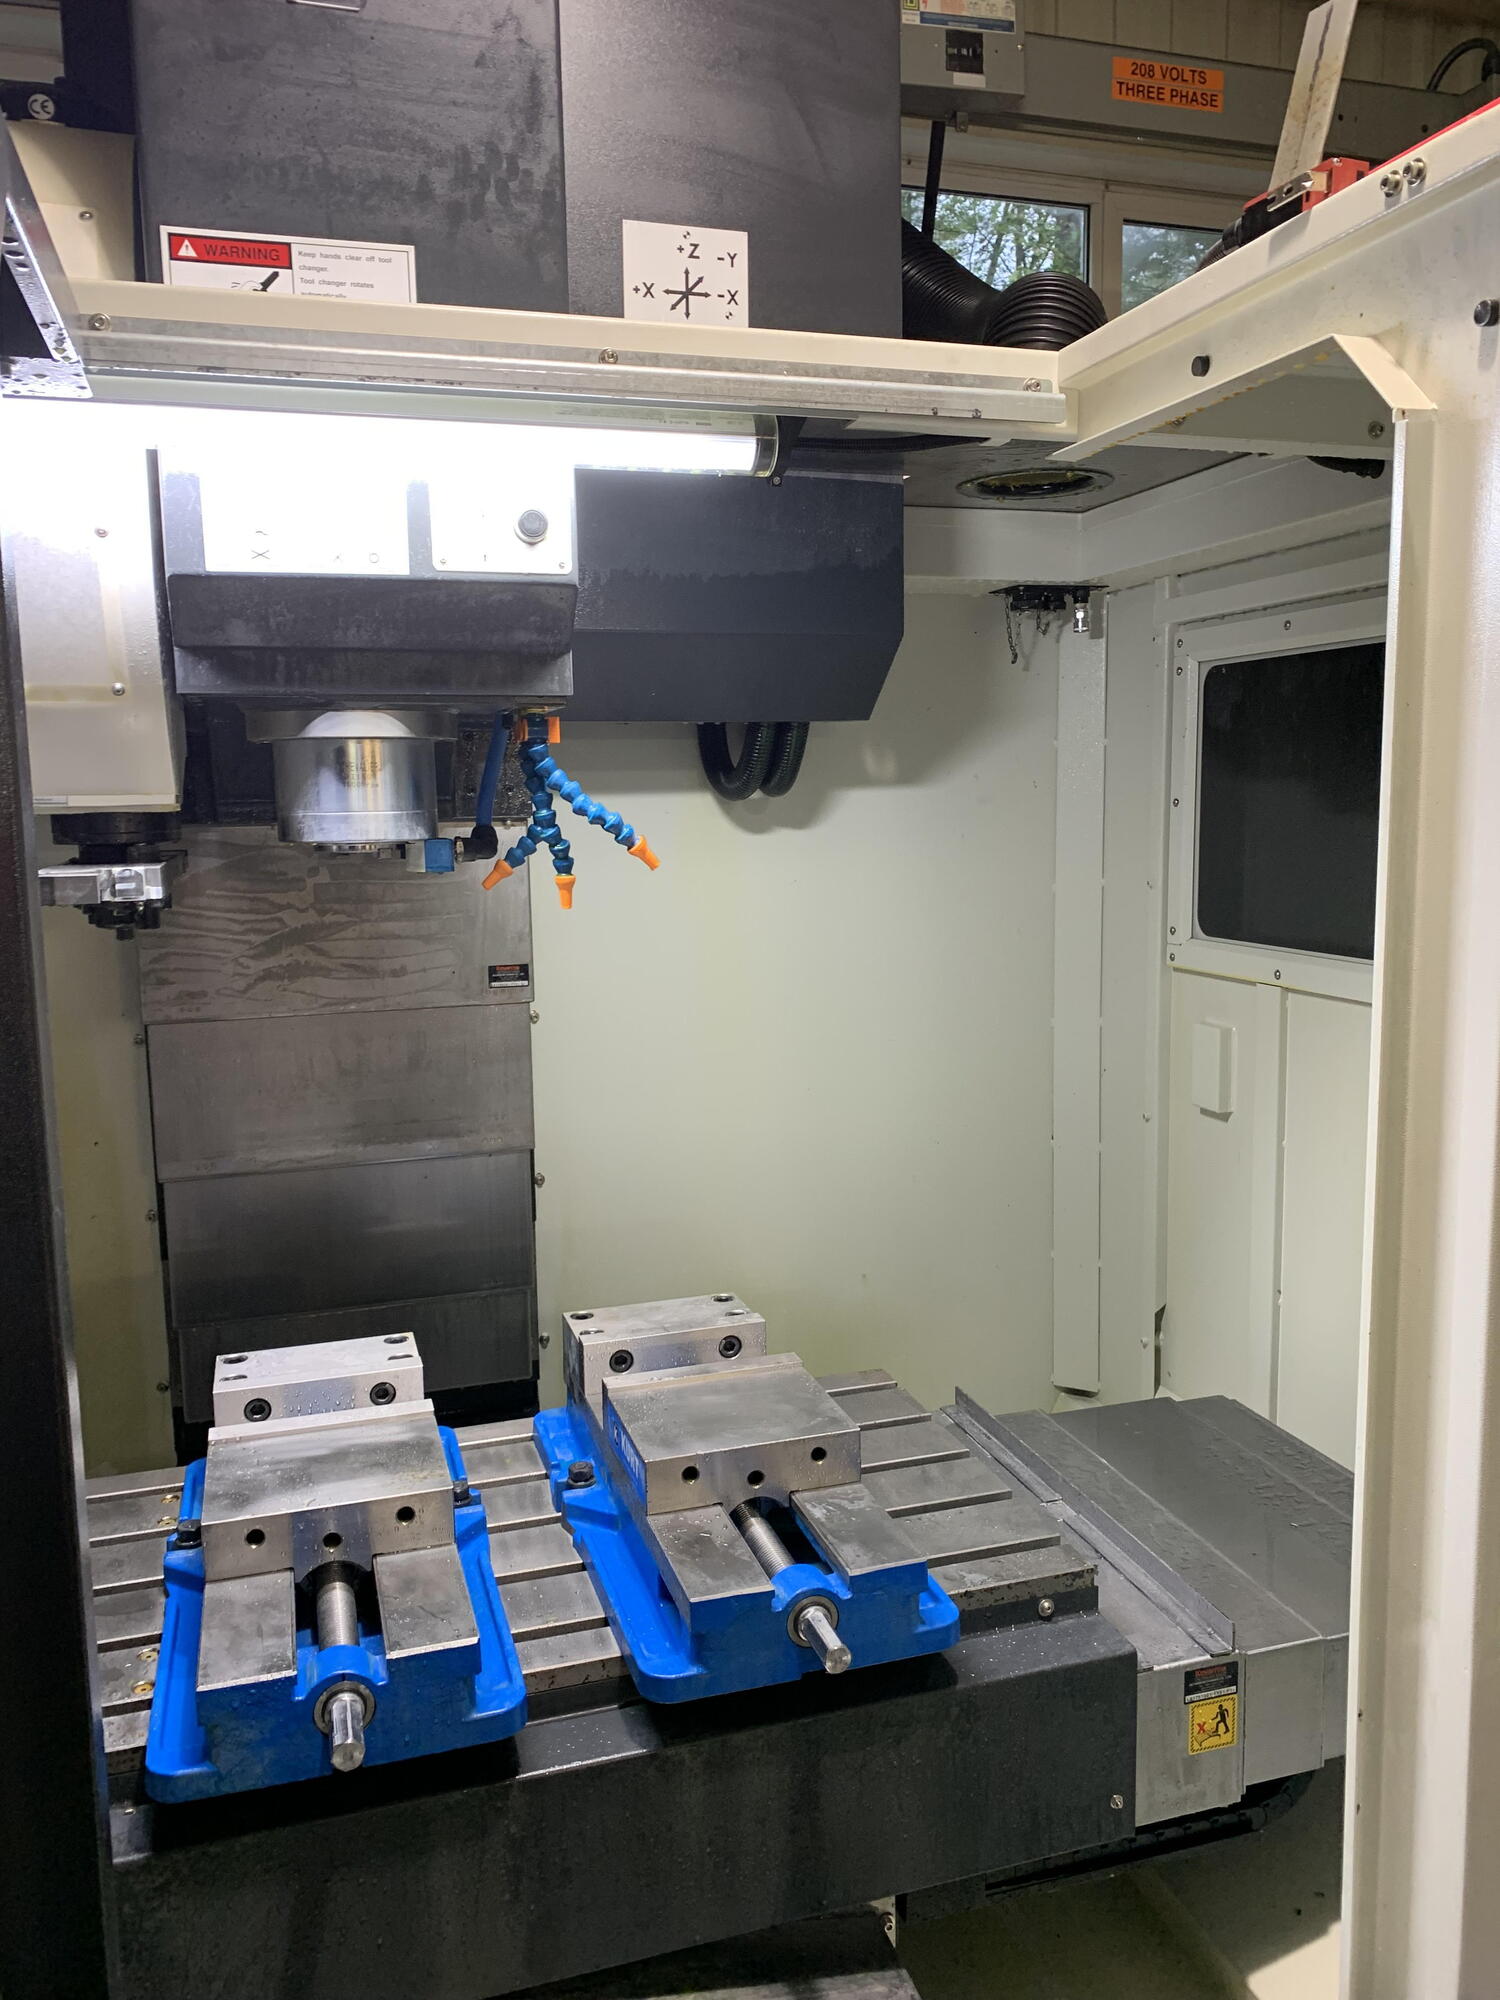 2019 CHEVALIER EM2033L Vertical Machining Centers | New England Industrial Machinery